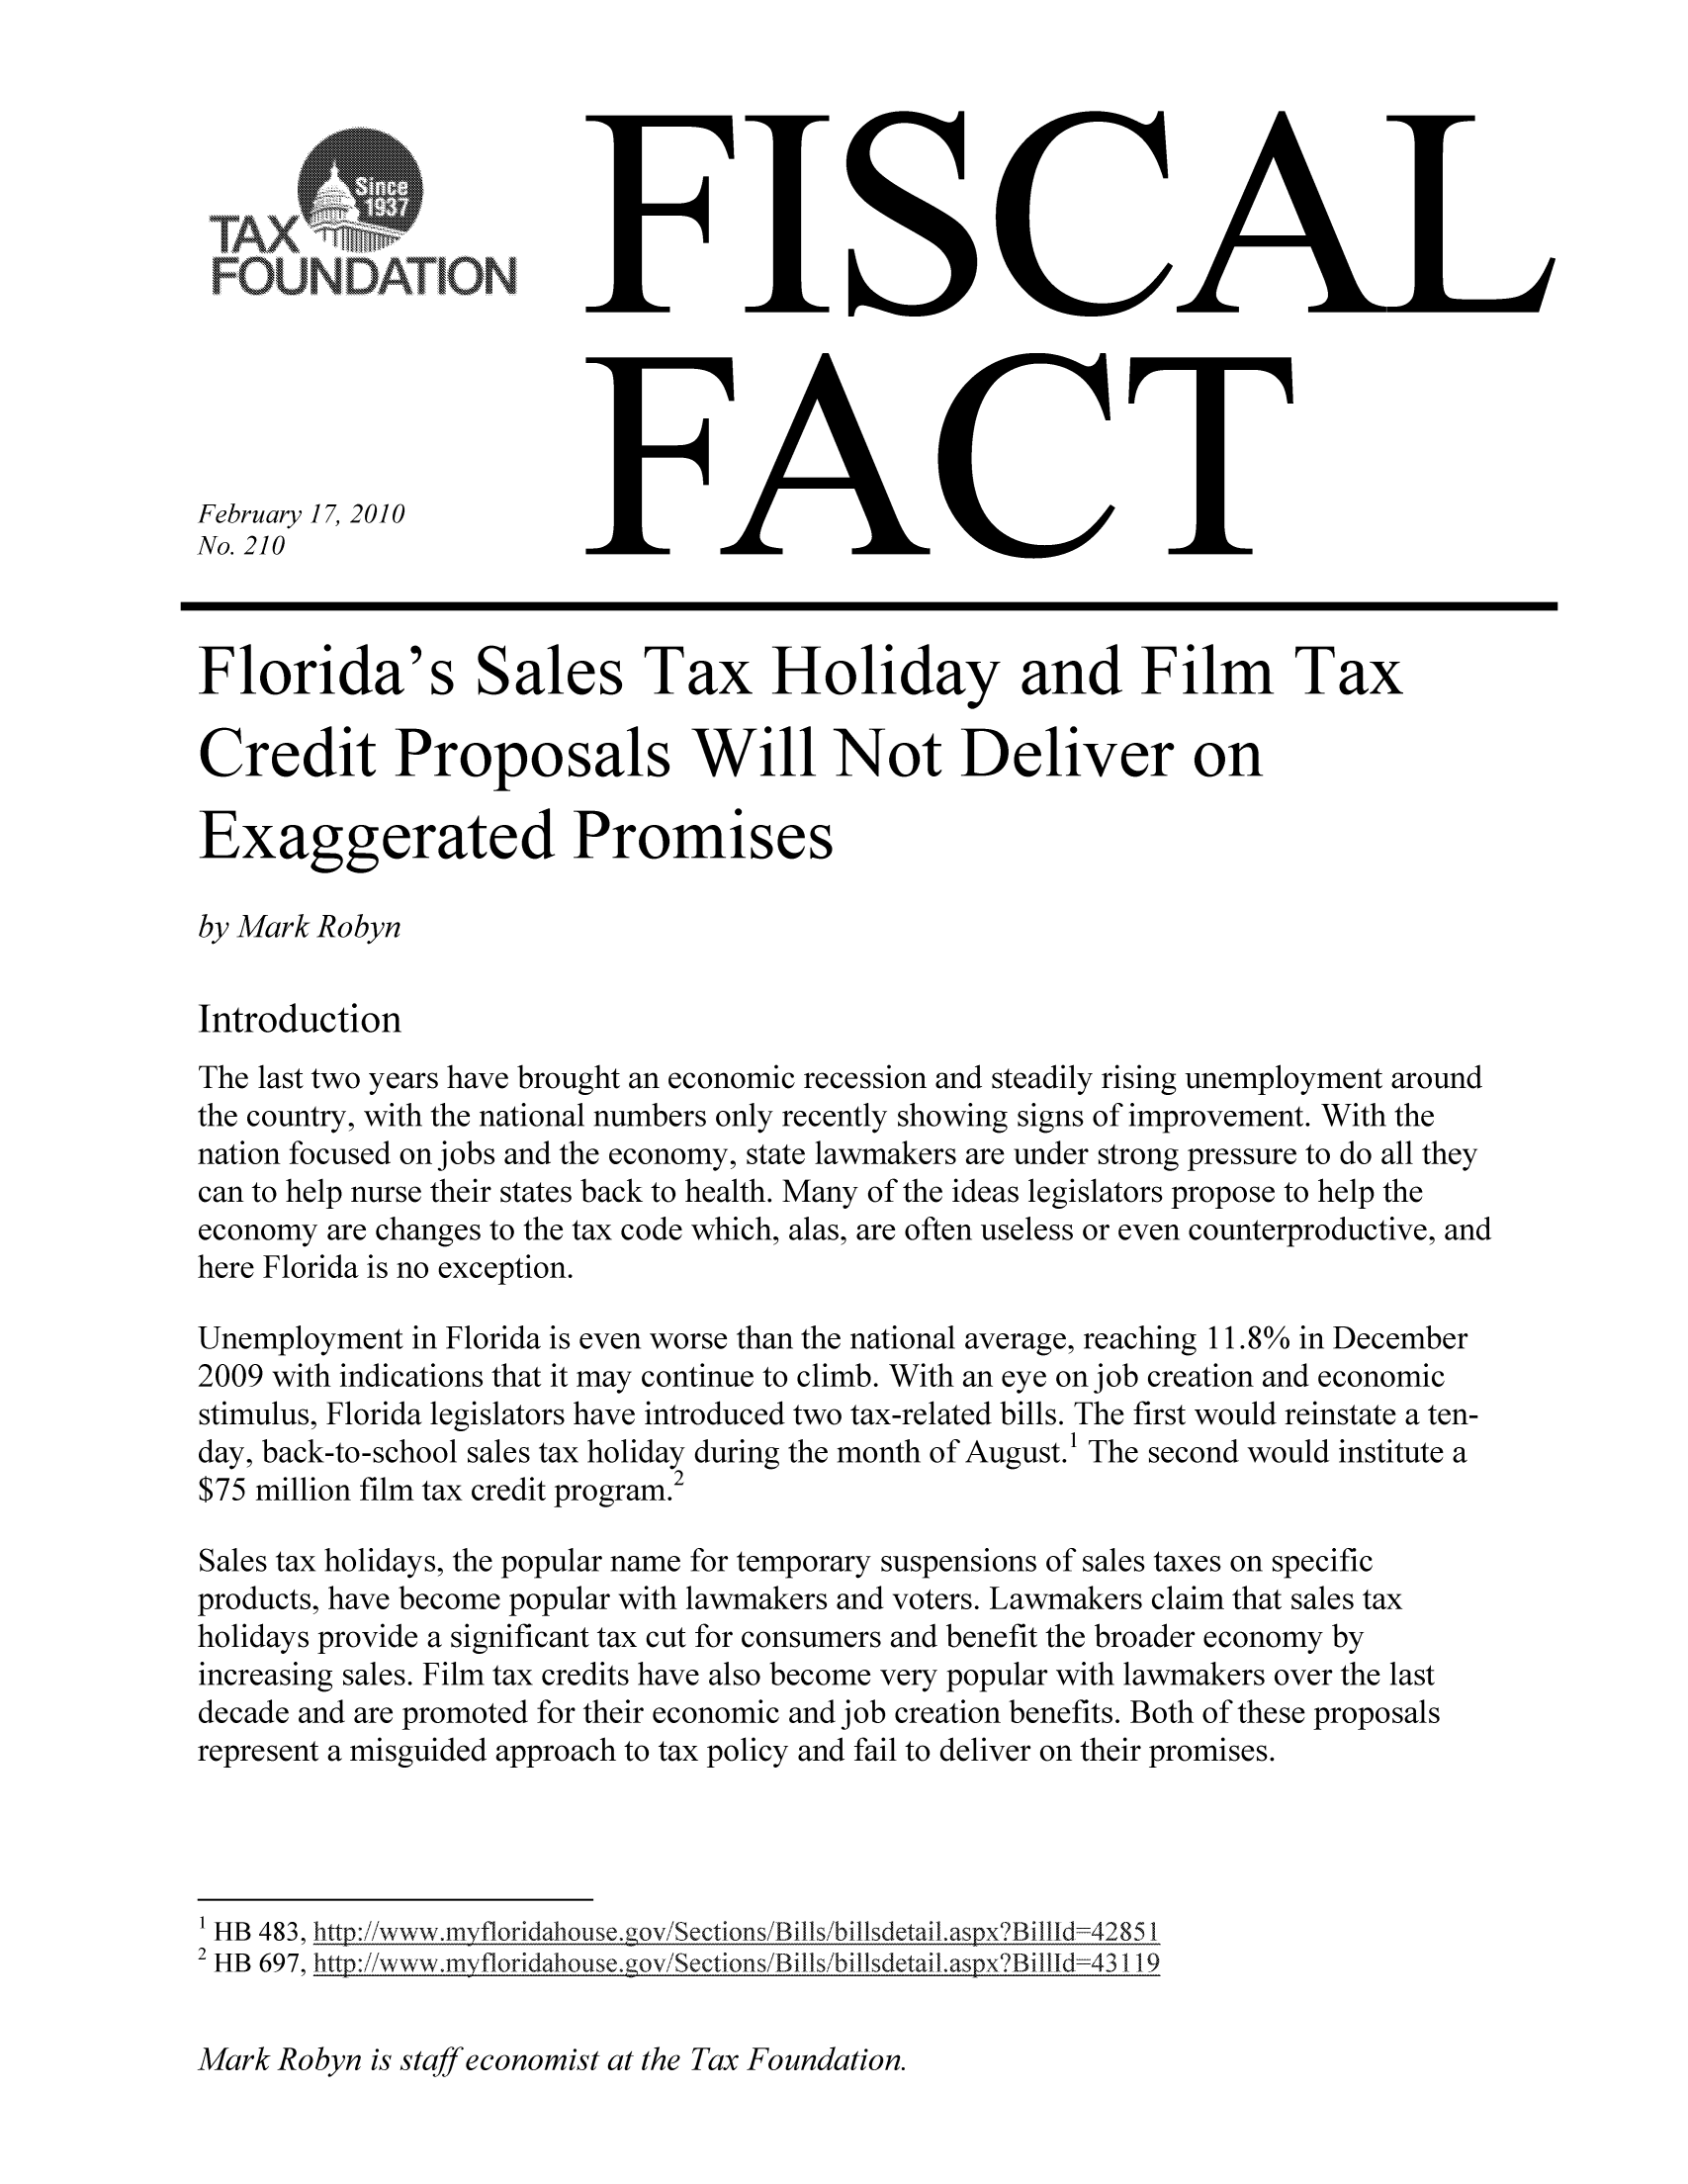 handle is hein.taxfoundation/ffcbaxz0001 and id is 1 raw text is: FISCAL

FACT

Florida's Sales Tax Holiday and Film Tax
Credit Proposals Will Not Deliver on
Exaggerated Promises
by Mark Robyn
Introduction
The last two years have brought an economic recession and steadily rising unemployment around
the country, with the national numbers only recently showing signs of improvement. With the
nation focused on jobs and the economy, state lawmakers are under strong pressure to do all they
can to help nurse their states back to health. Many of the ideas legislators propose to help the
economy are changes to the tax code which, alas, are often useless or even counterproductive, and
here Florida is no exception.
Unemployment in Florida is even worse than the national average, reaching 11.8% in December
2009 with indications that it may continue to climb. With an eye on job creation and economic
stimulus, Florida legislators have introduced two tax-related bills. The first would reinstate a ten-
day, back-to-school sales tax holiday during the month of August.' The second would institute a
$75 million film tax credit program.2
Sales tax holidays, the popular name for temporary suspensions of sales taxes on specific
products, have become popular with lawmakers and voters. Lawmakers claim that sales tax
holidays provide a significant tax cut for consumers and benefit the broader economy by
increasing sales. Film tax credits have also become very popular with lawmakers over the last
decade and are promoted for their economic and job creation benefits. Both of these proposals
represent a misguided approach to tax policy and fail to deliver on their promises.
HB 483, http:/iwww.nvfloridahouse.goviSections/Billsbillsdetail.aspx?Billld=42851
2 Ht
HB 697, http.: //www.Myfloridqho use. go  Sction:/B ills/bilsdet'il. spxB ilfld=4 3119

Mark Robyn is staff economist at the Tax Foundation.

February 17, 2010
No. 210

SATION


